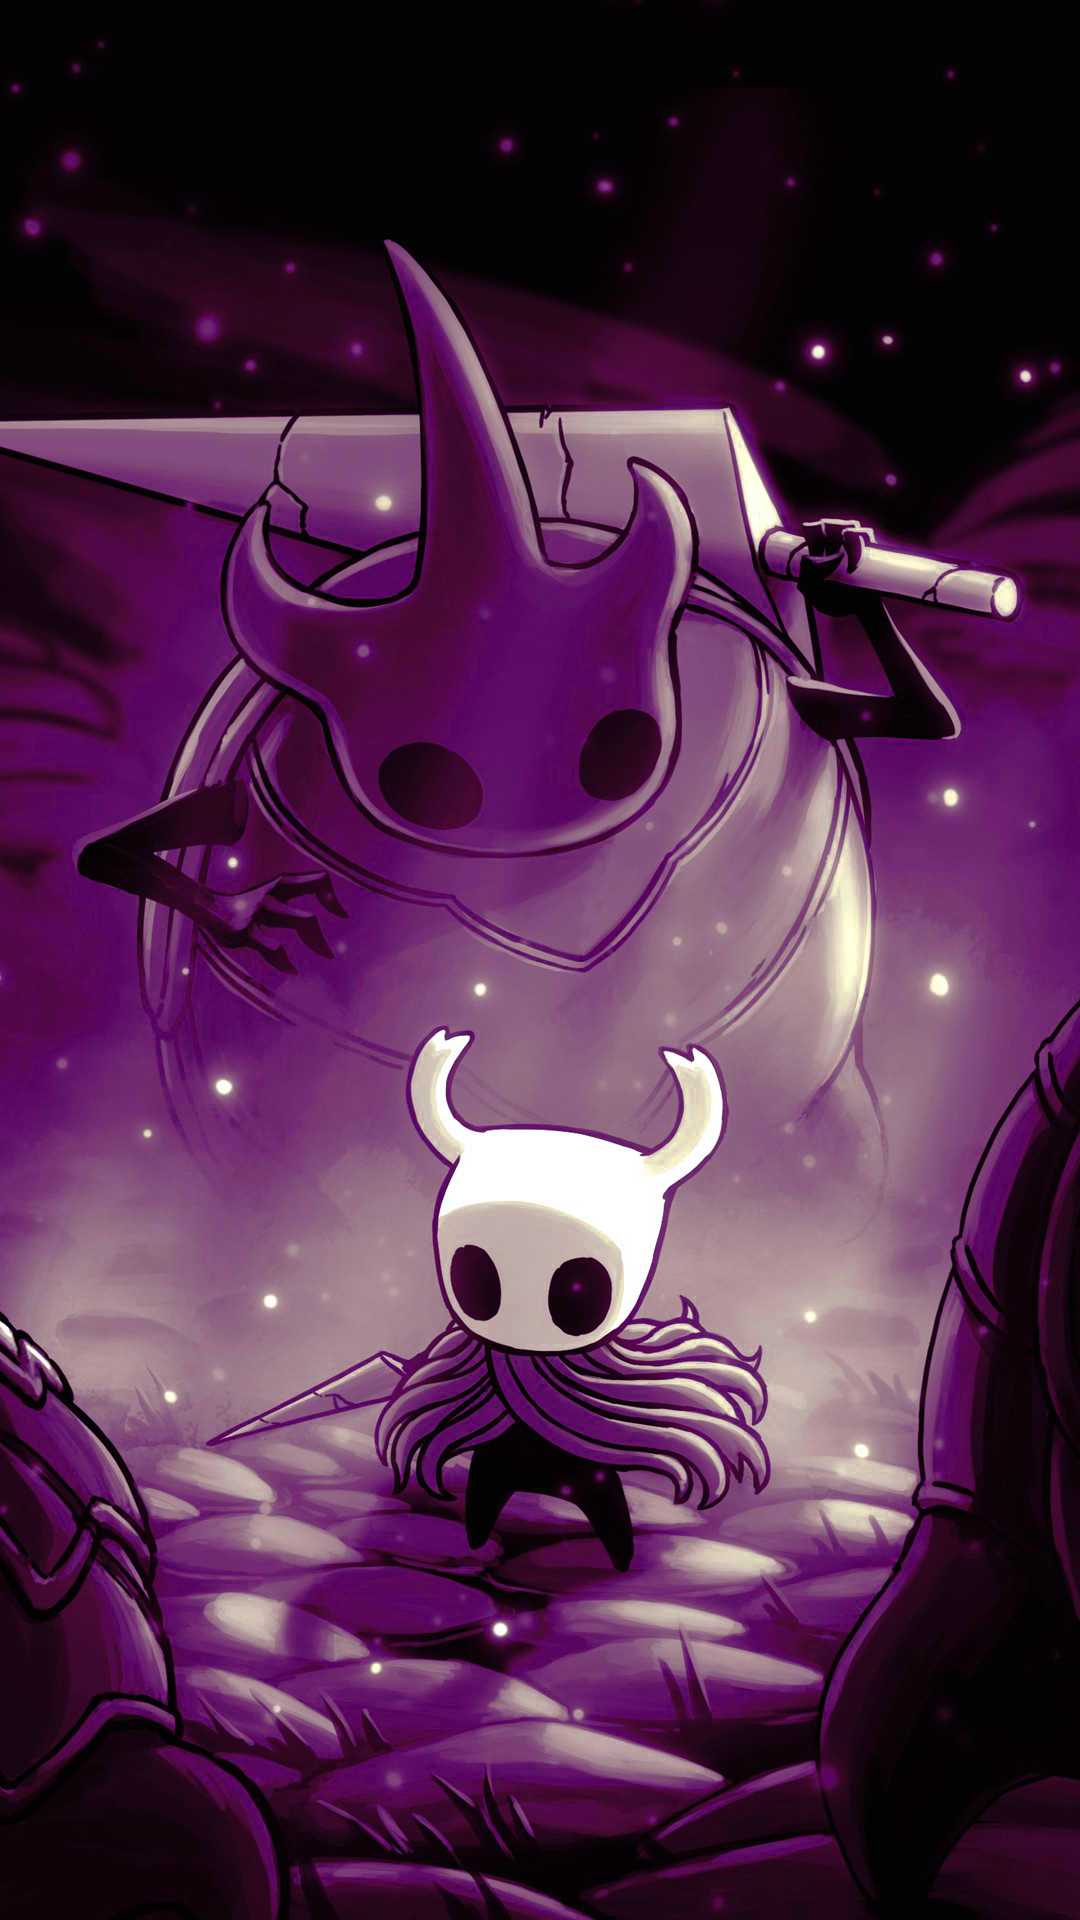 Hollow Knight wallpapers for desktop download free Hollow Knight pictures  and backgrounds for PC  moborg